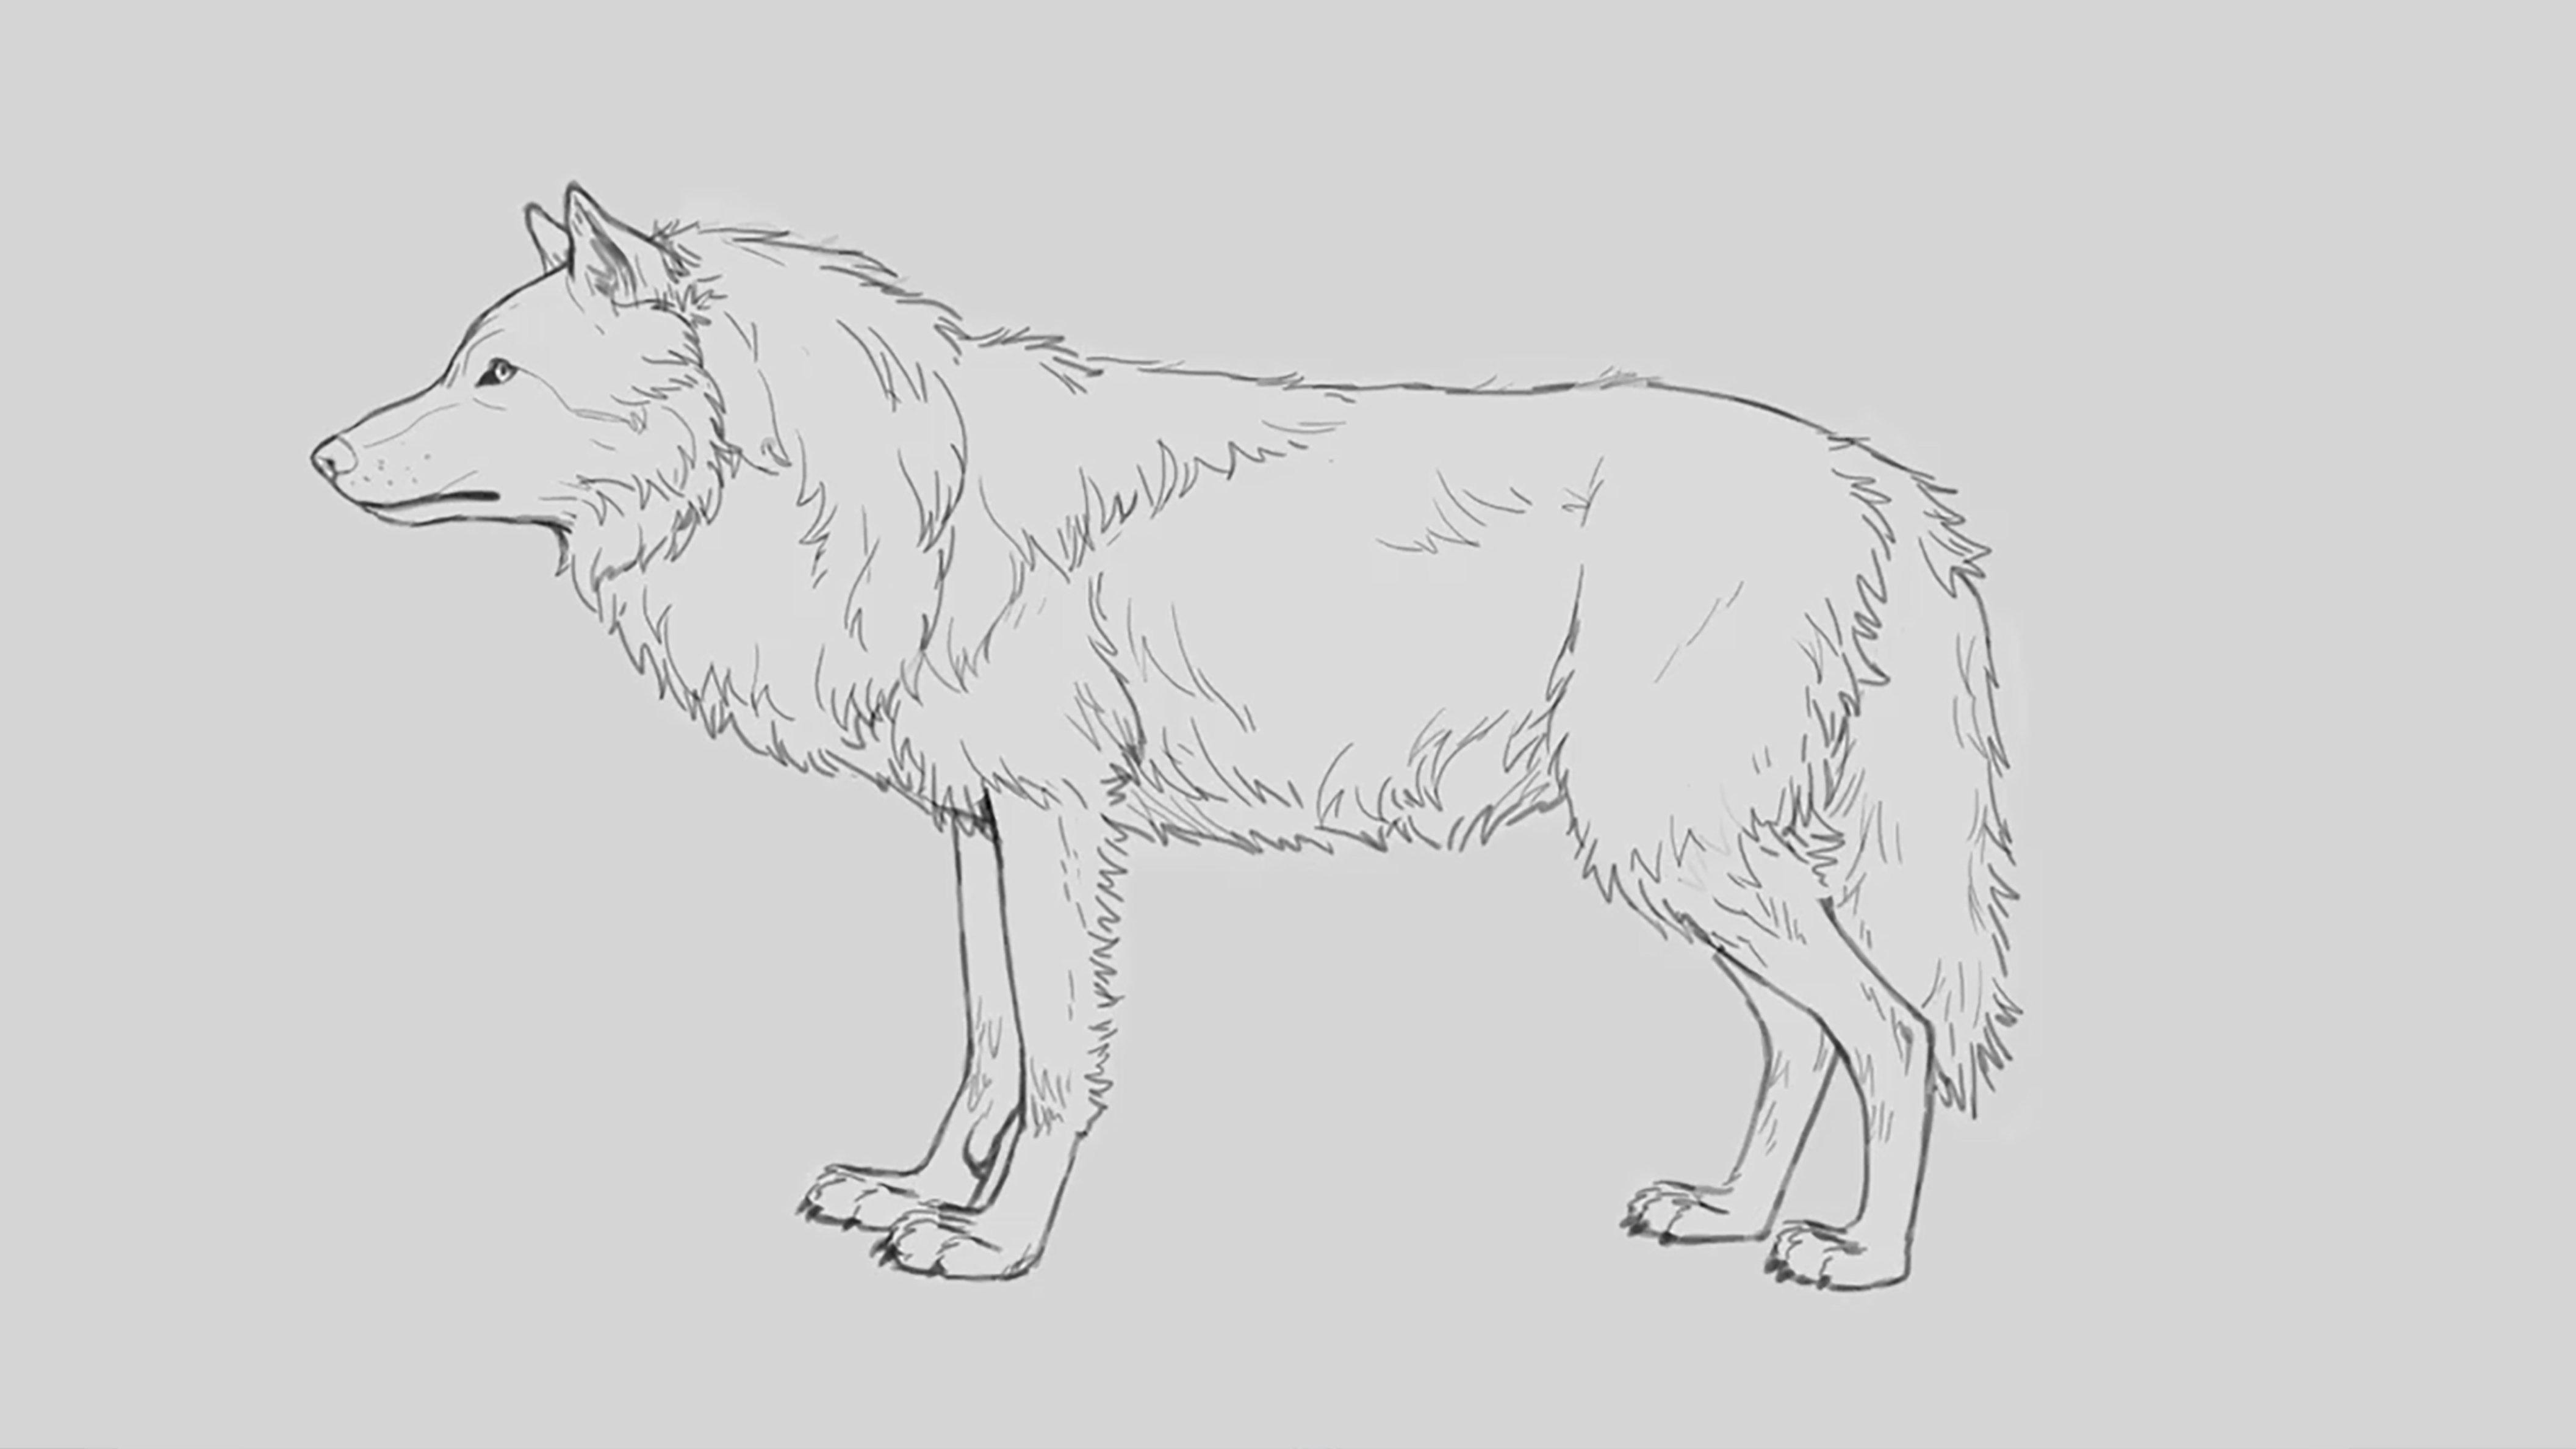 How to draw: Pencil sketch of a wolf with a full winter coat